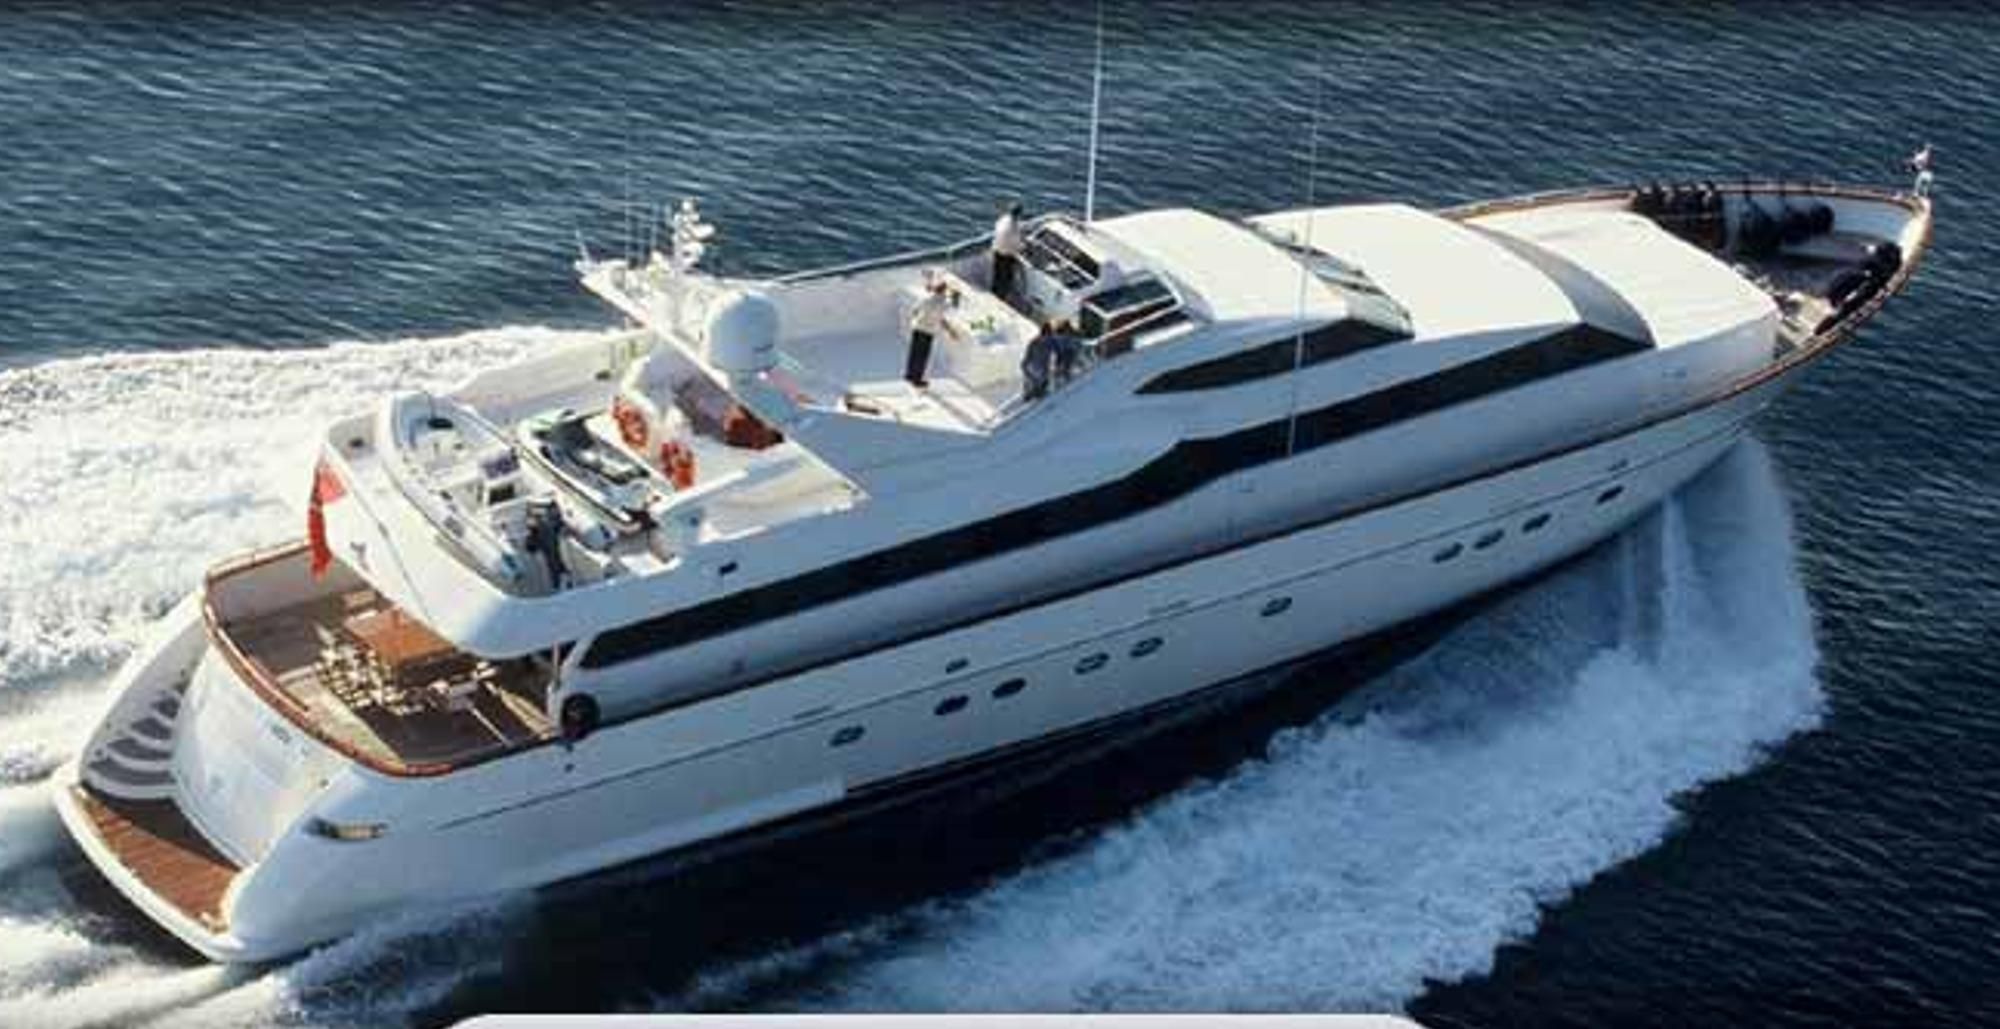 falcon motor yachts for sale